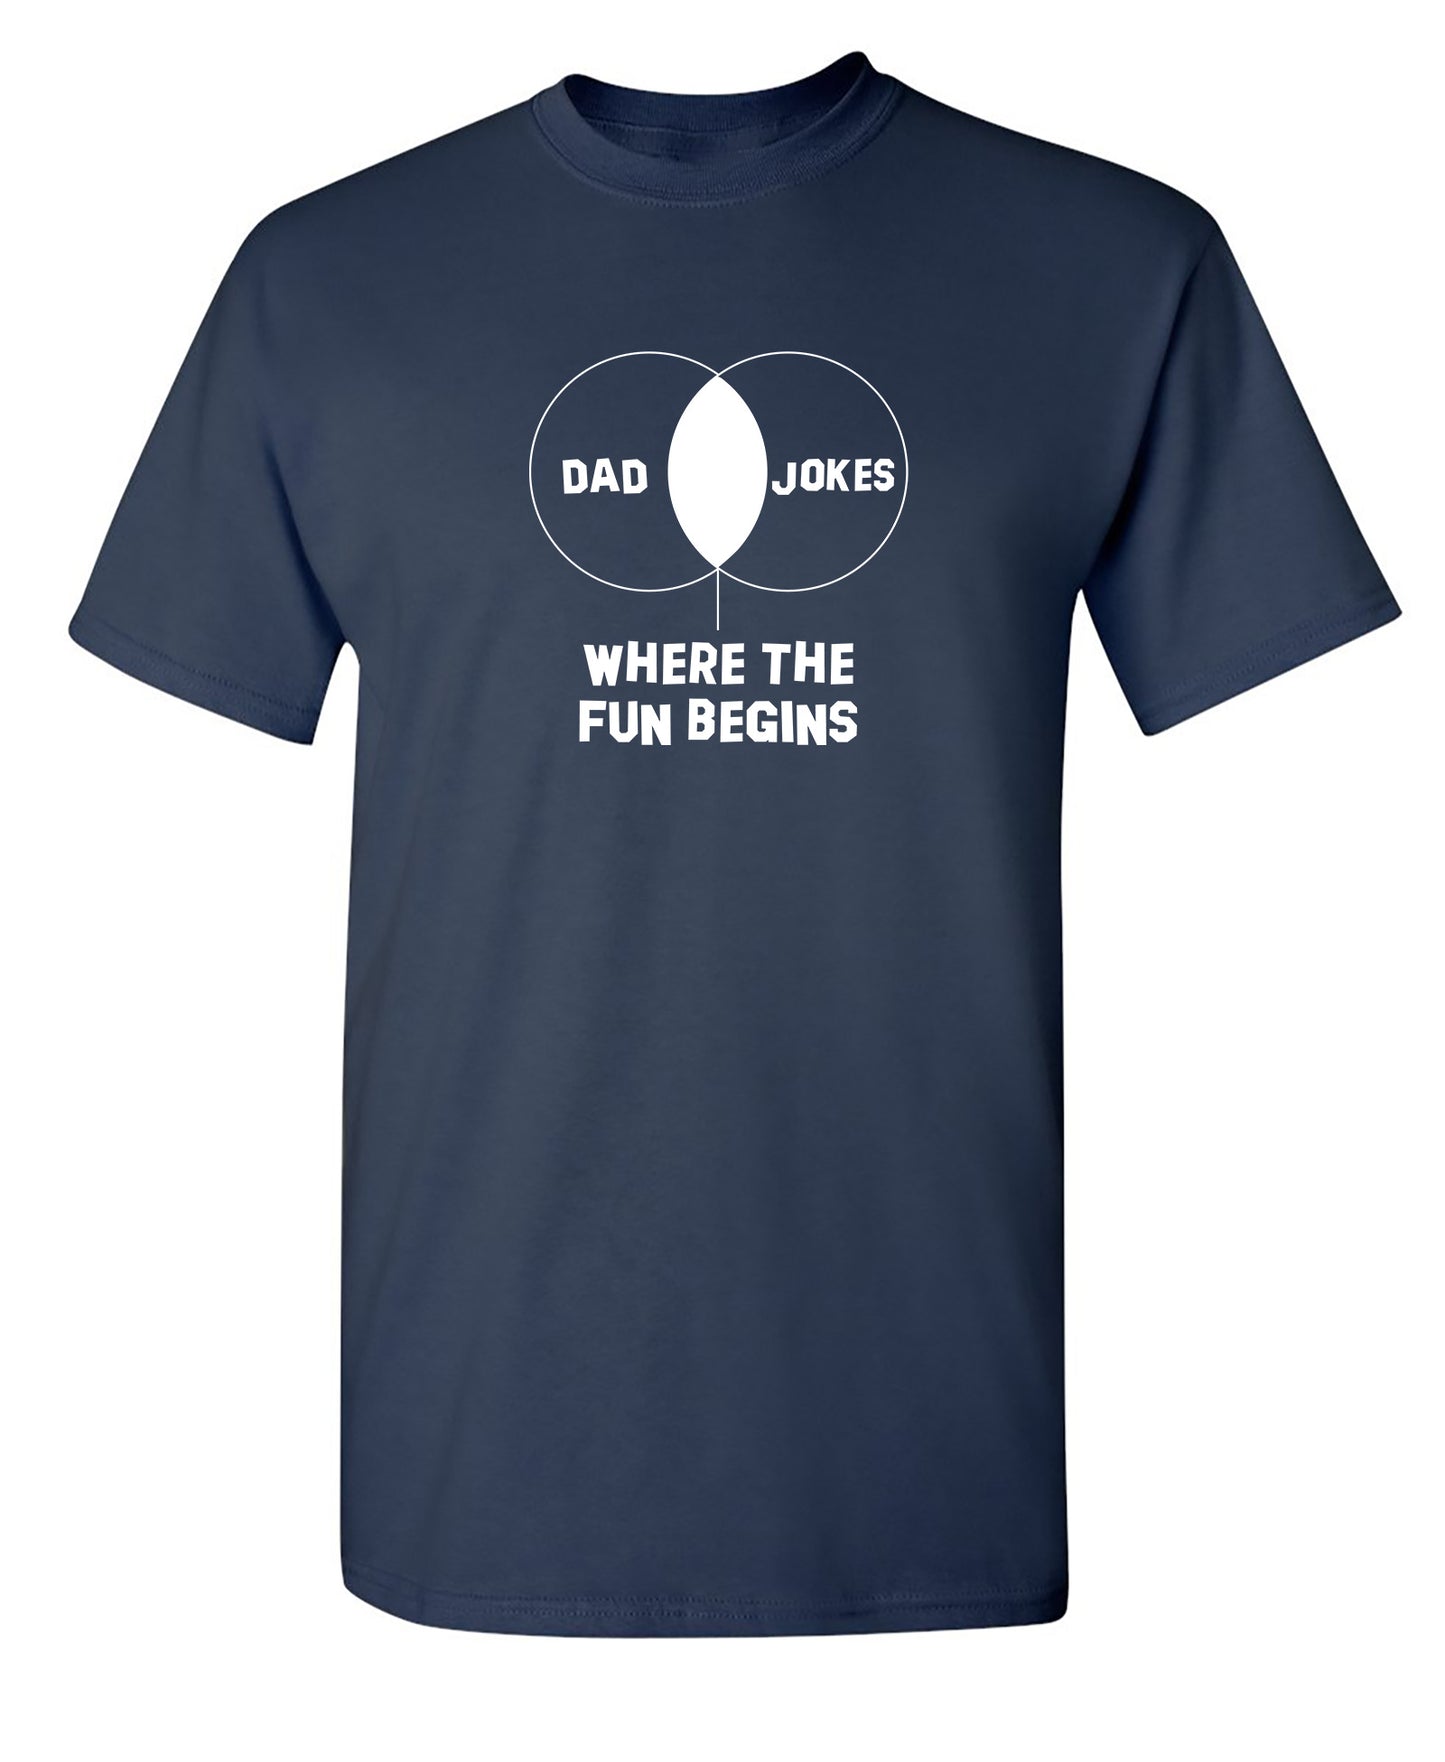 Dad Jokes where the fun begins - Funny T Shirts & Graphic Tees